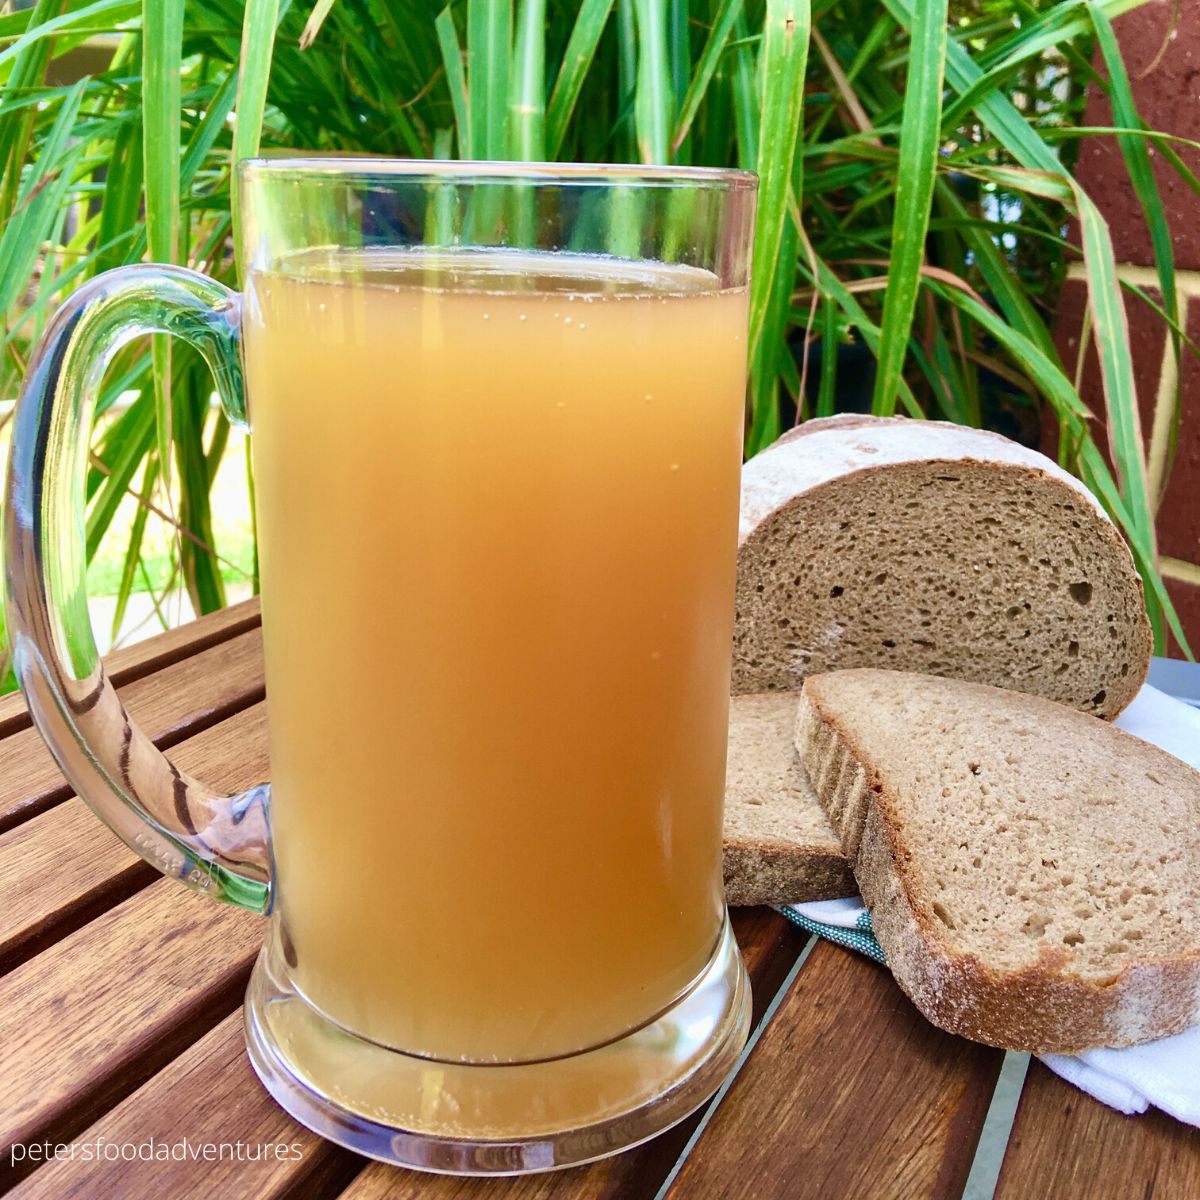 bread kvass in a pin with loaf of bread